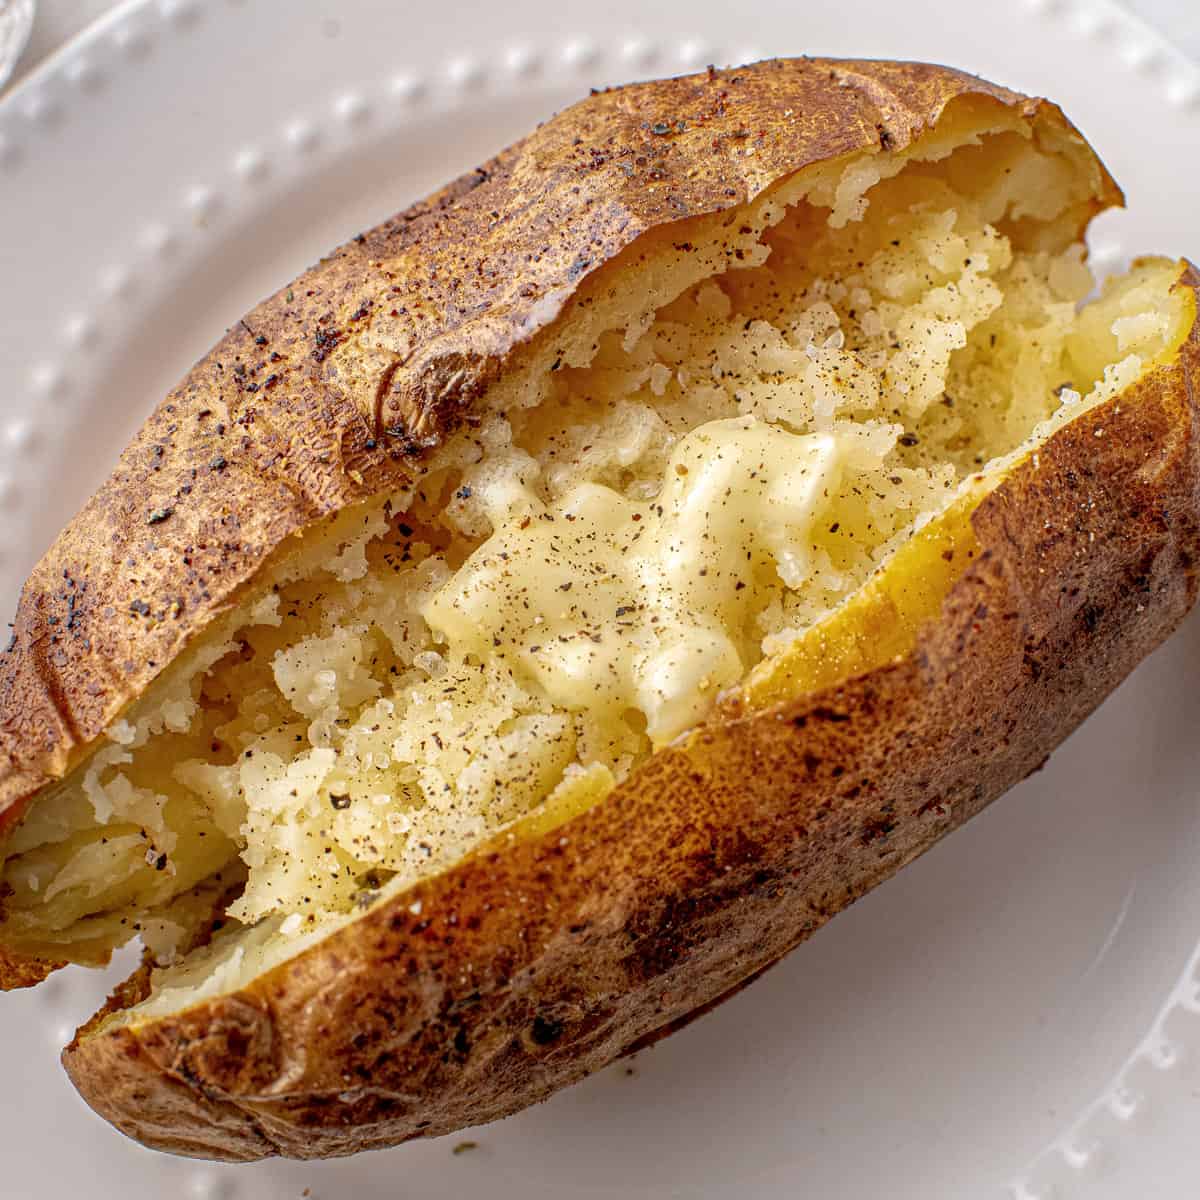 https://www.thechunkychef.com/wp-content/uploads/2022/03/Air-Fryer-Baked-Potatoes-recipe-card.jpg